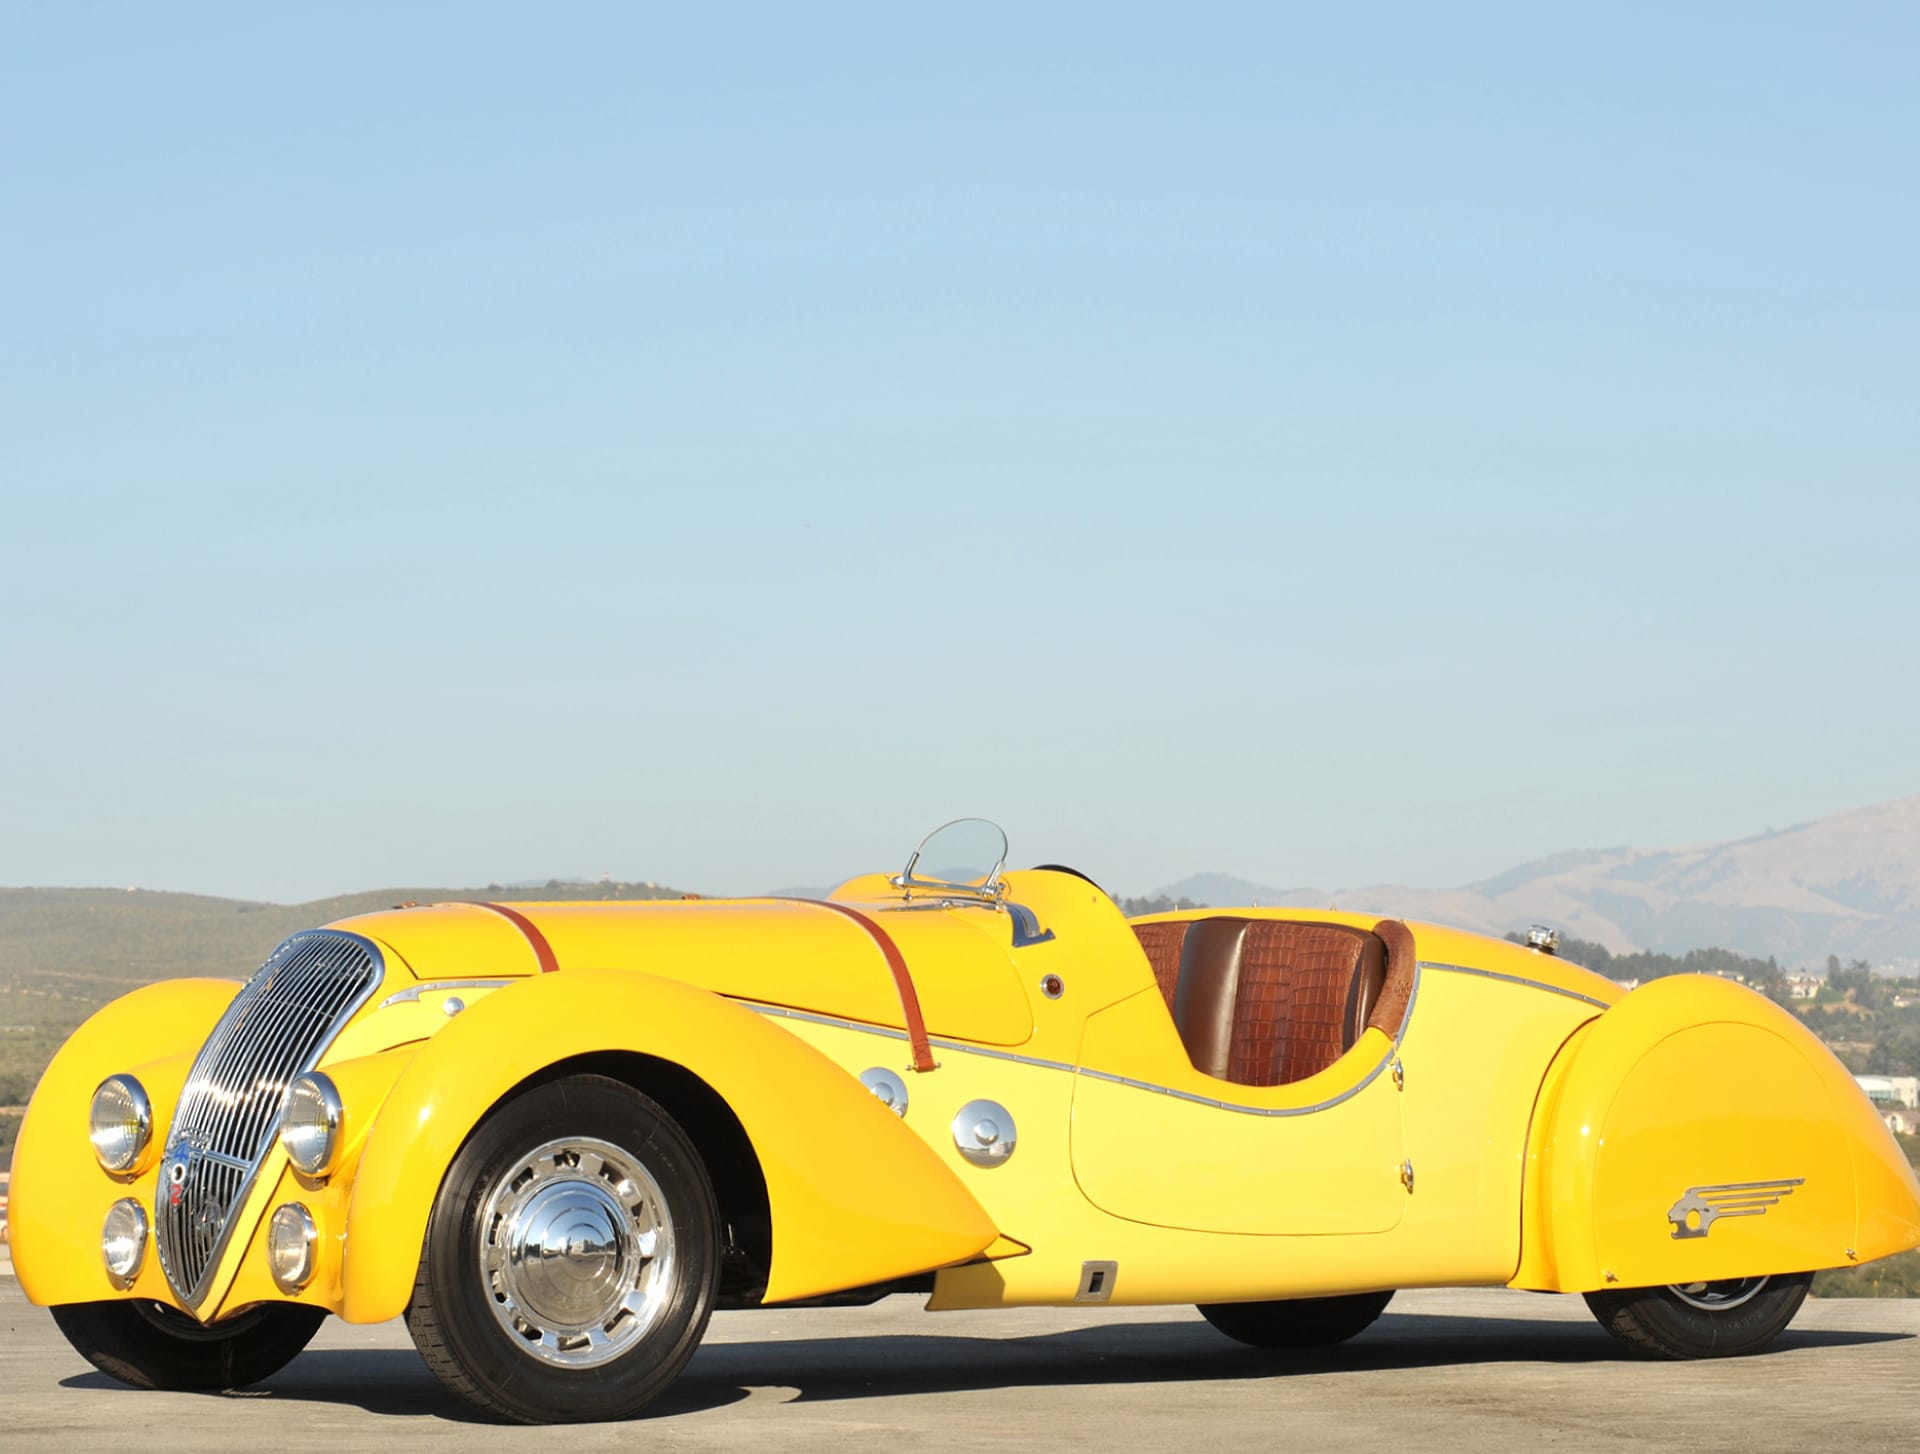 1938 Peugeot 402 Darlmat Legere Special Sport Roadster wallpapers HD quality